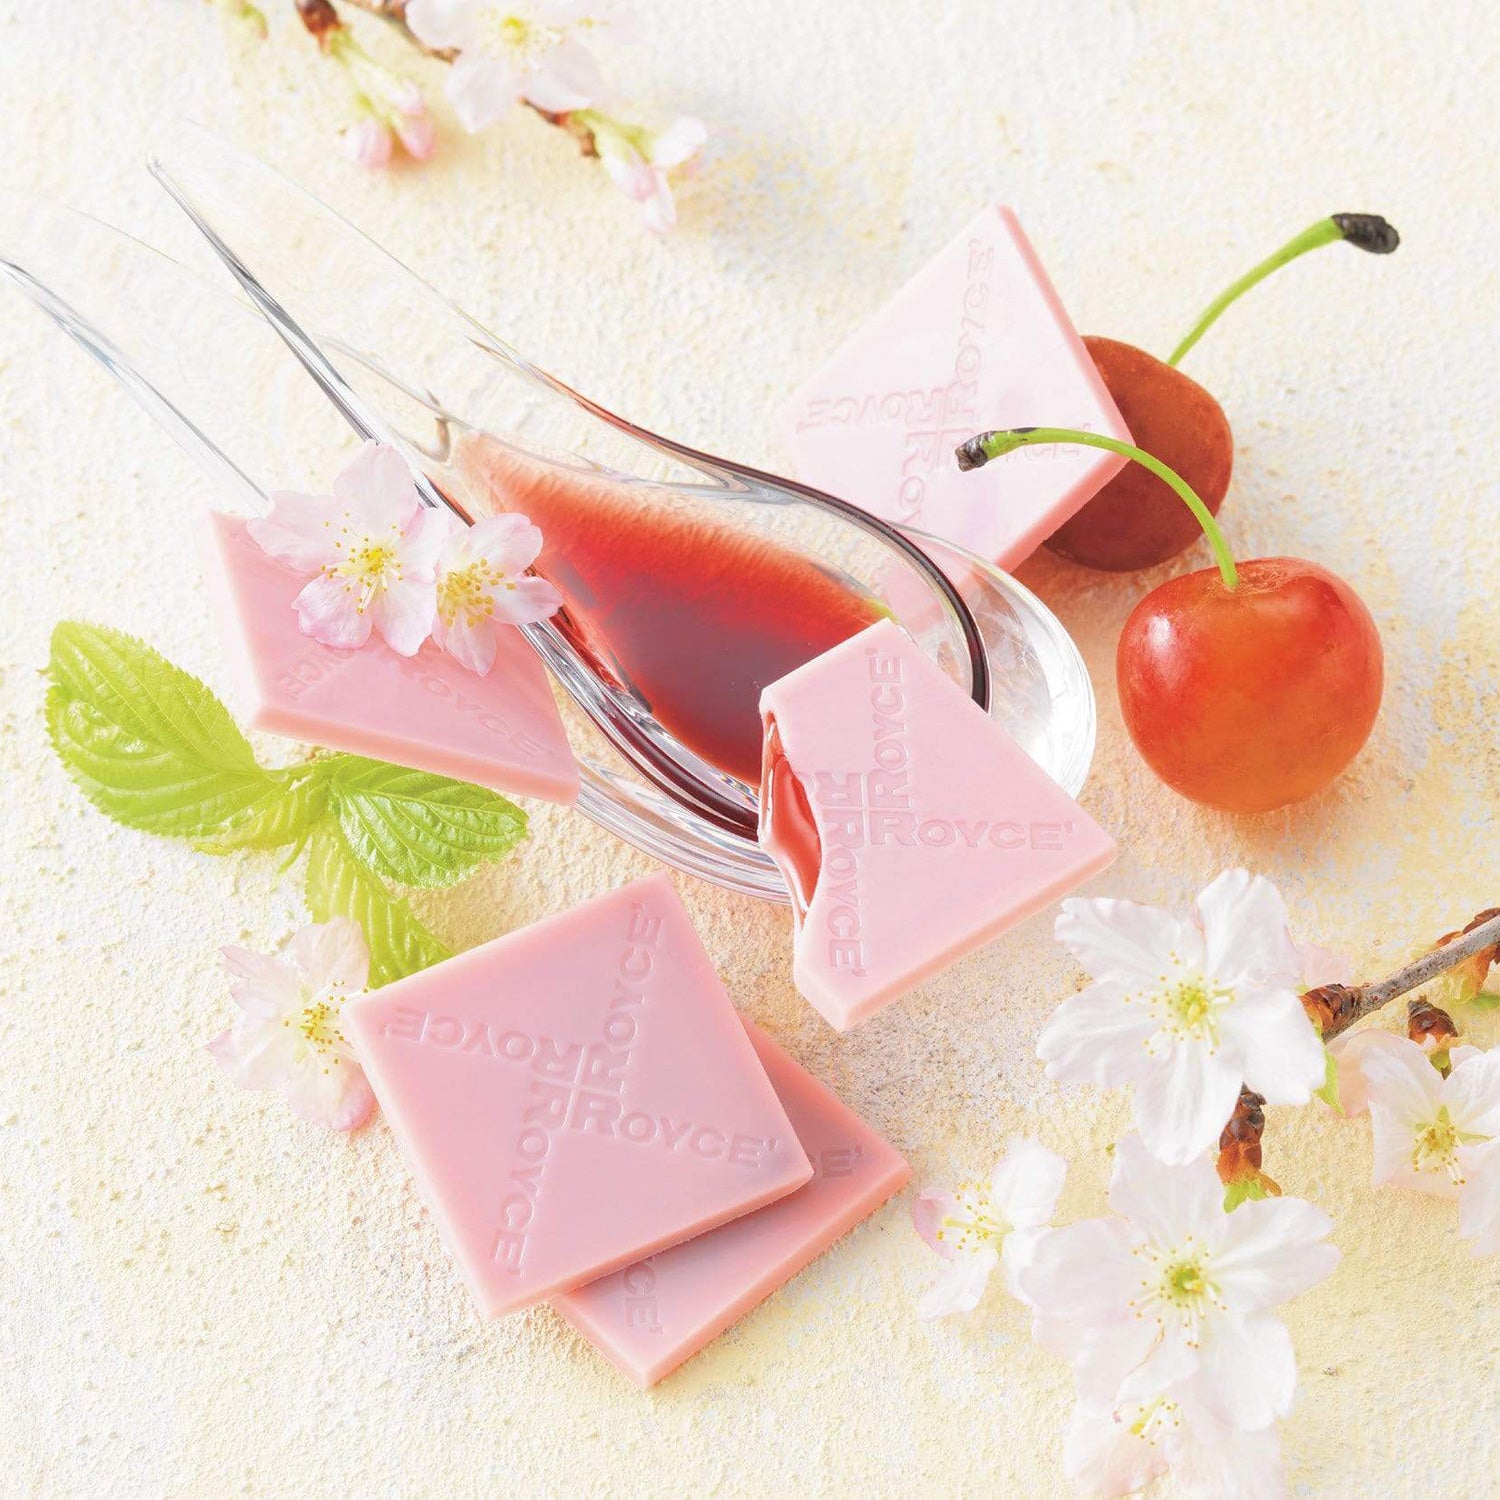 ROYCE' Chocolate - Prafeuille Chocolat "Sakura Cube" - Image shows pink chocolate squares filled with red sauce and engraved with the words "ROYCE'". Accents include clear spoons with red sauce inside, red cherries with green stems, green leaves, and white flowers with brown and gray stems. Background is in color white.